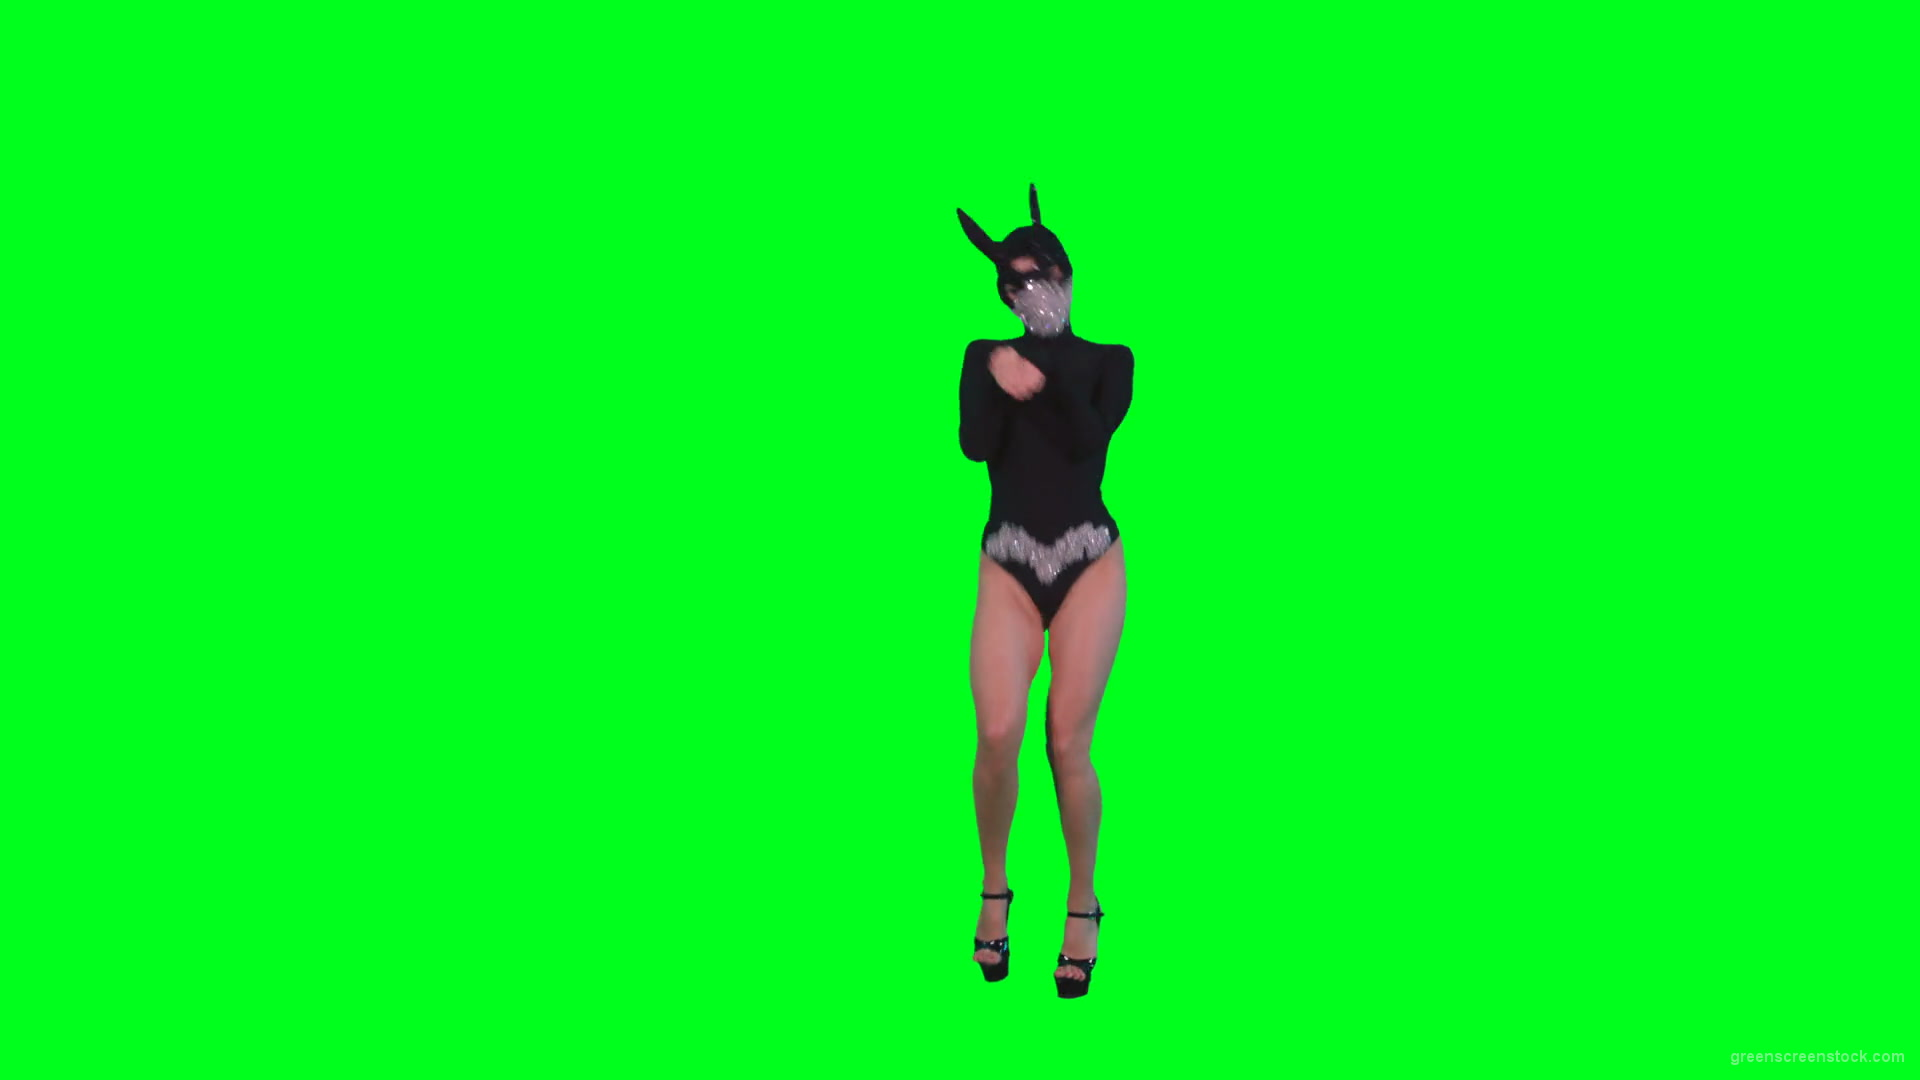 Go-Go-Dancing-Girl-in-Rabbit-Mask-jumping-in-black-costume-on-Green-Screen-4K-Video-Footage-1920_004 Green Screen Stock